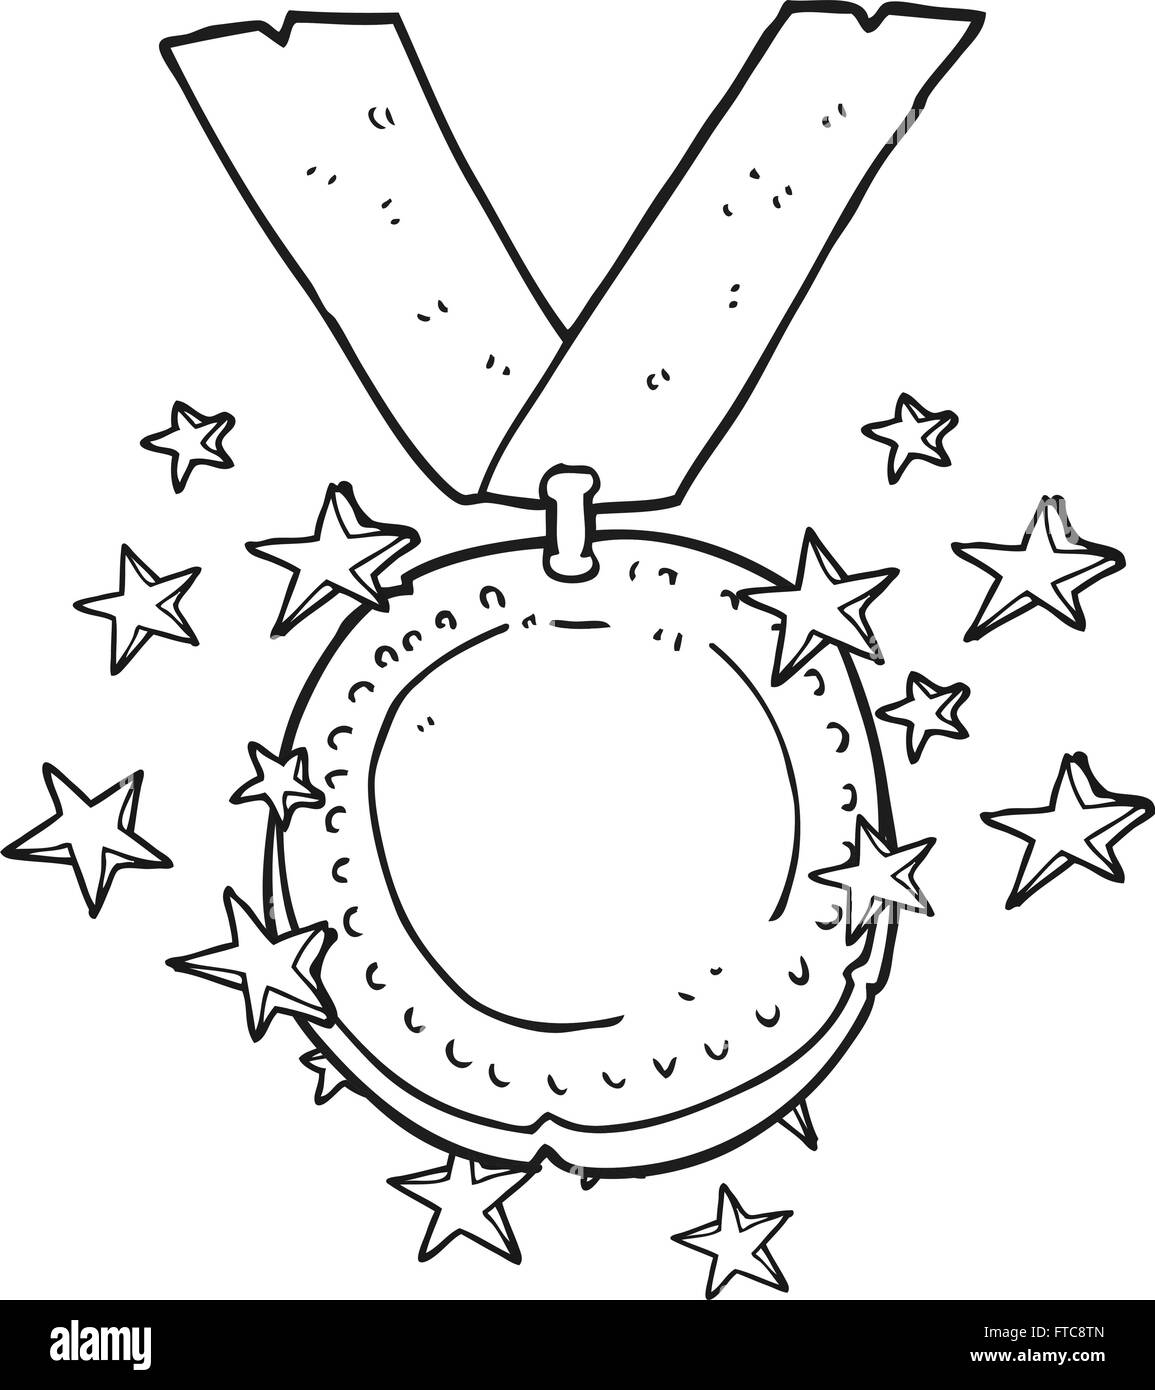 freehand drawn black and white cartoon sparkling gold medal Stock Vector